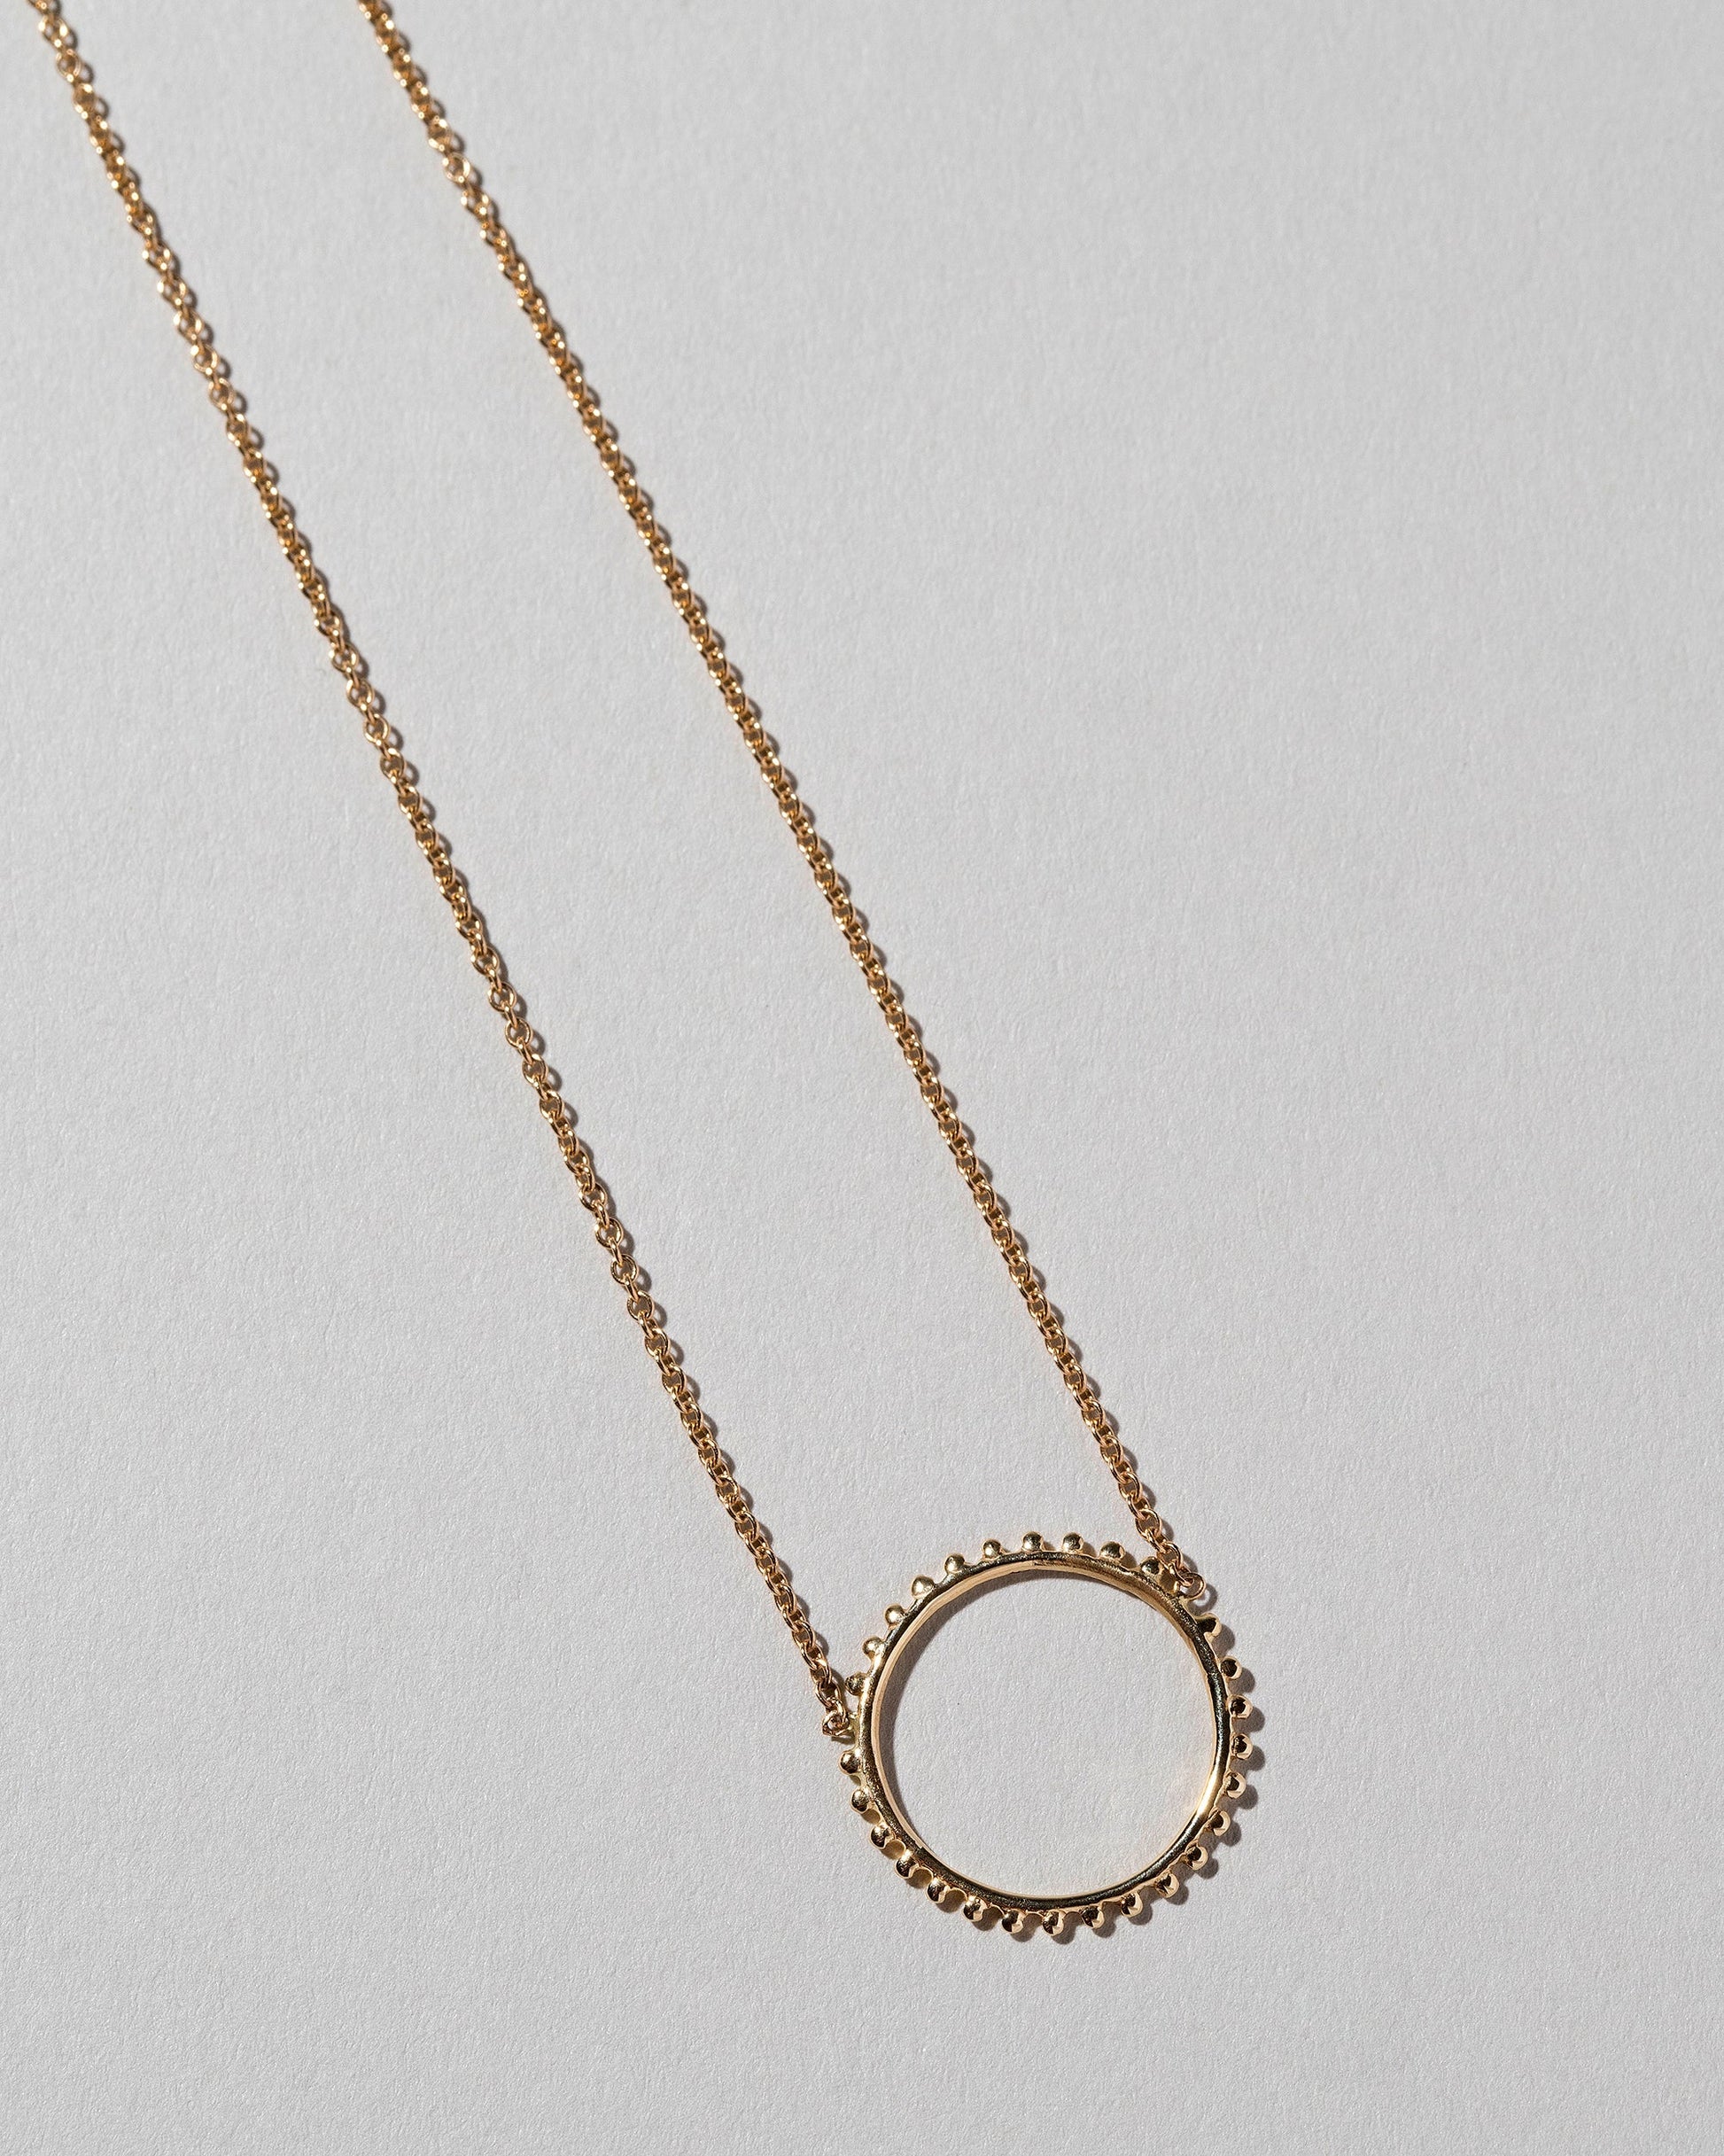 Sunbow Necklace on light colored background.